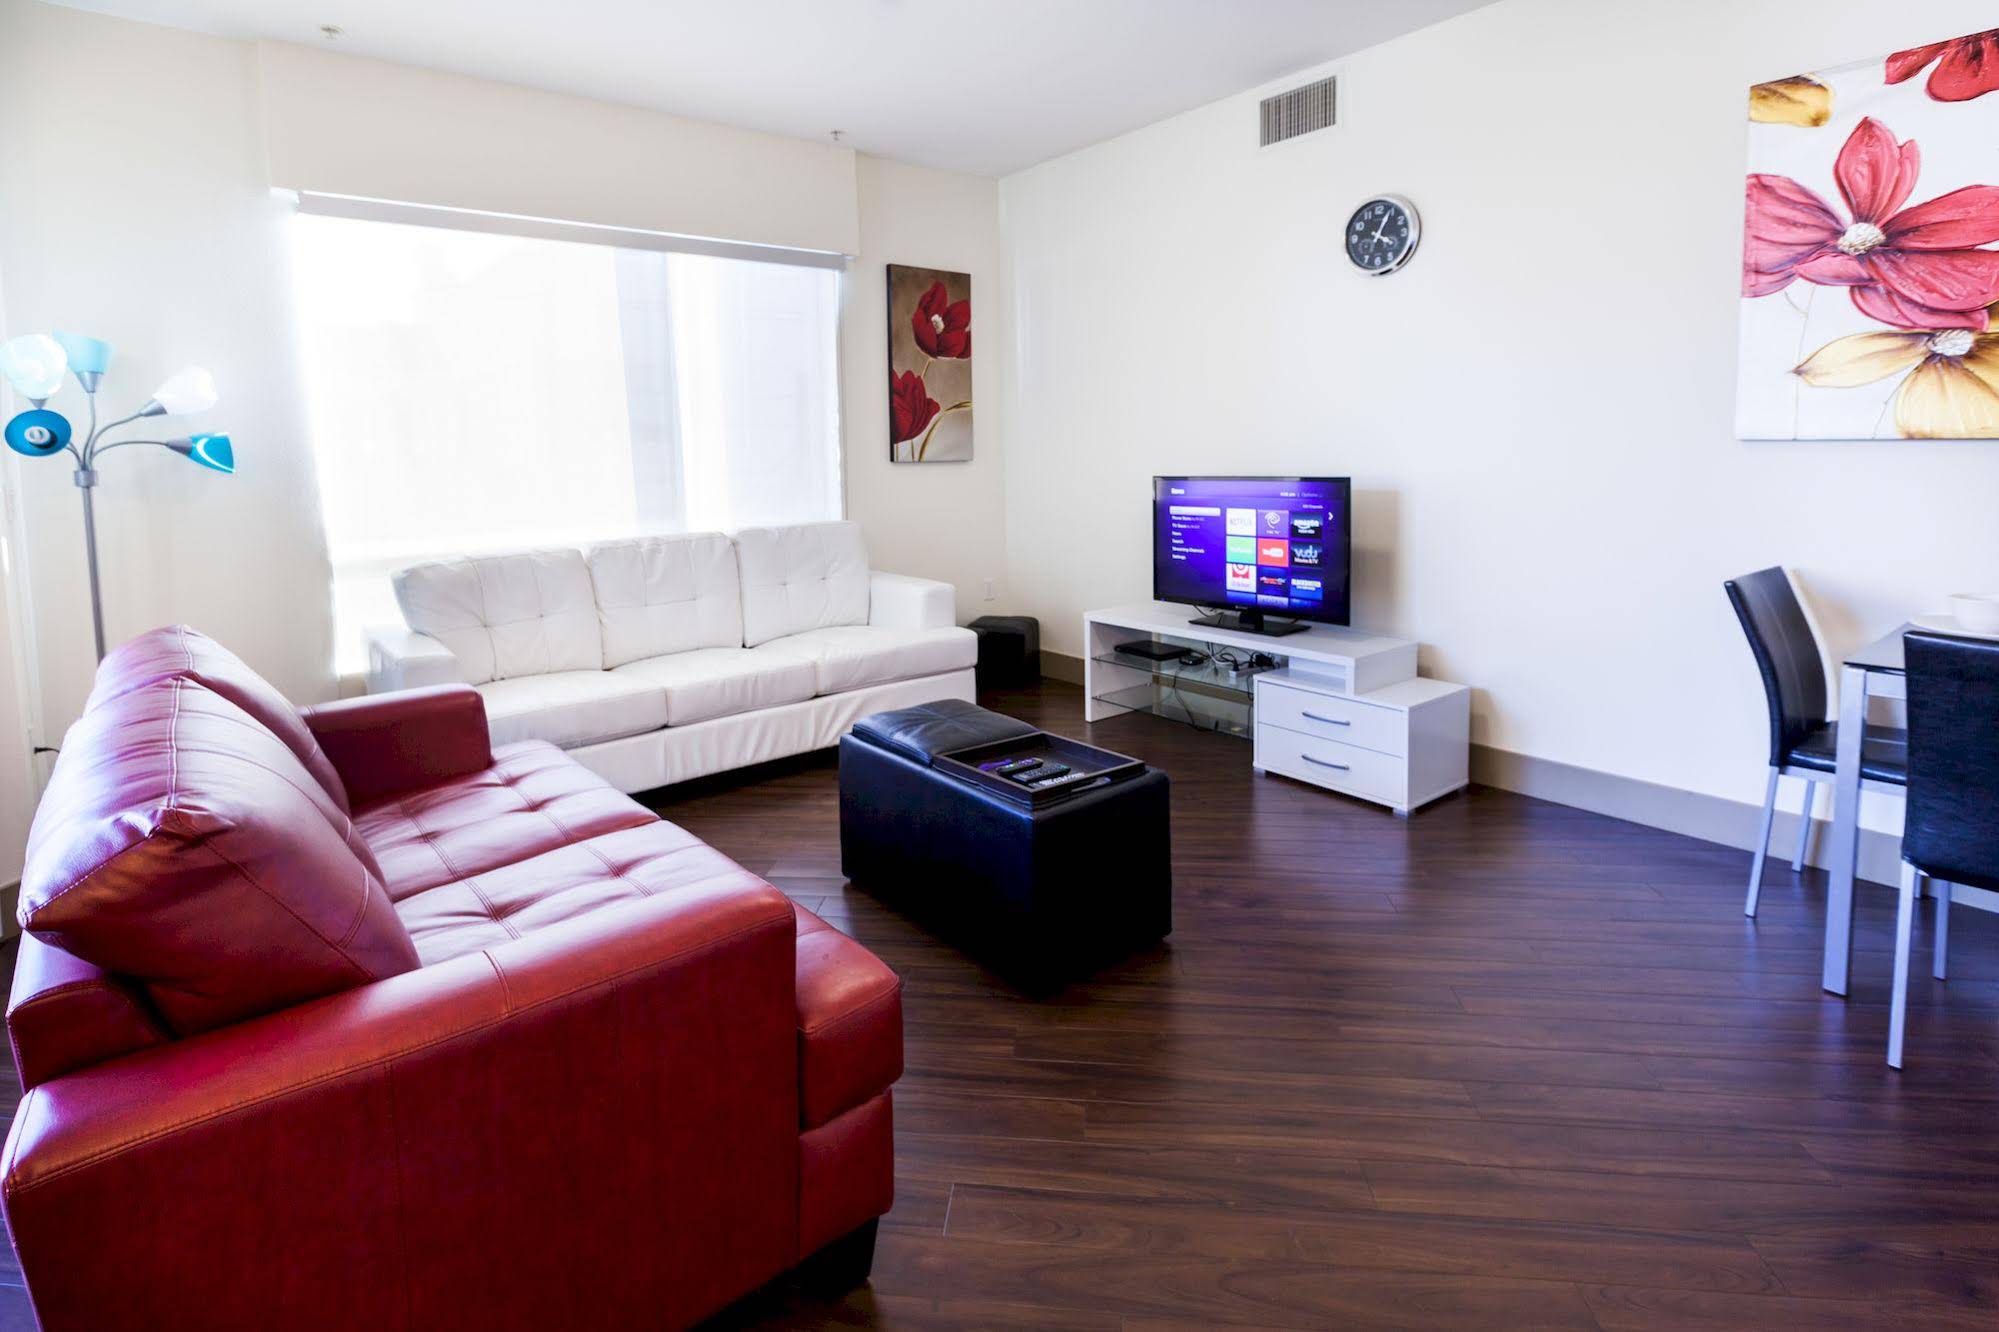 Heaven on Hollywood Boulevard Furnished Apartments